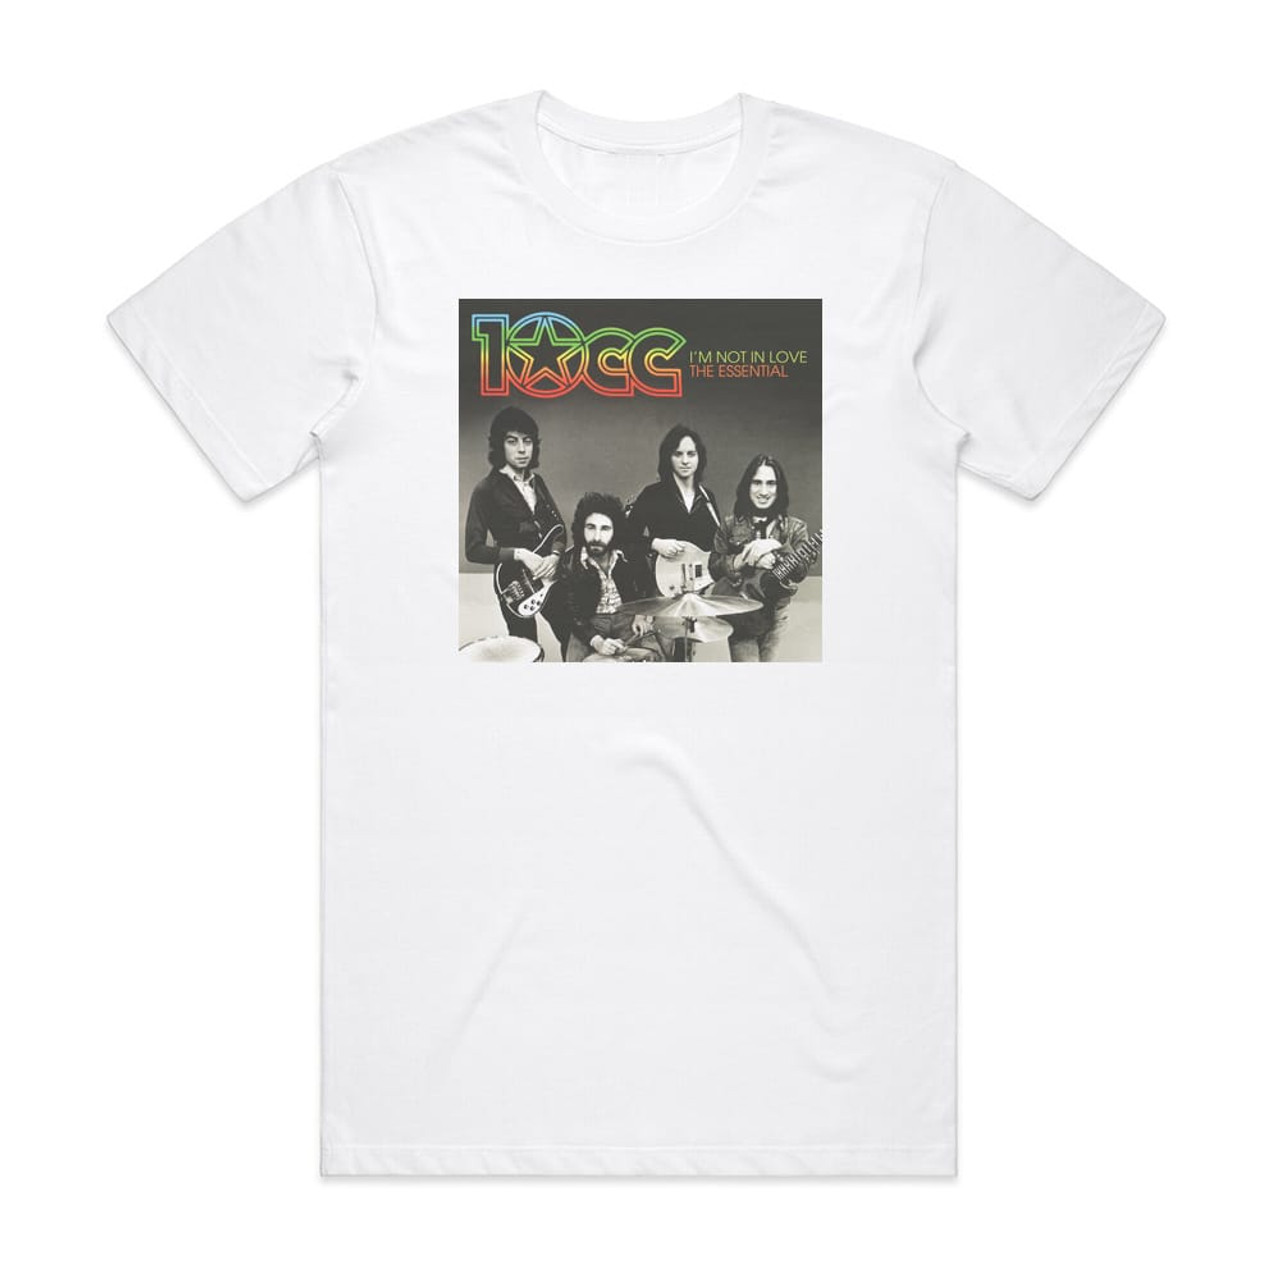 10cc Im Not In Love The Essential Collection Album Cover T-Shirt White